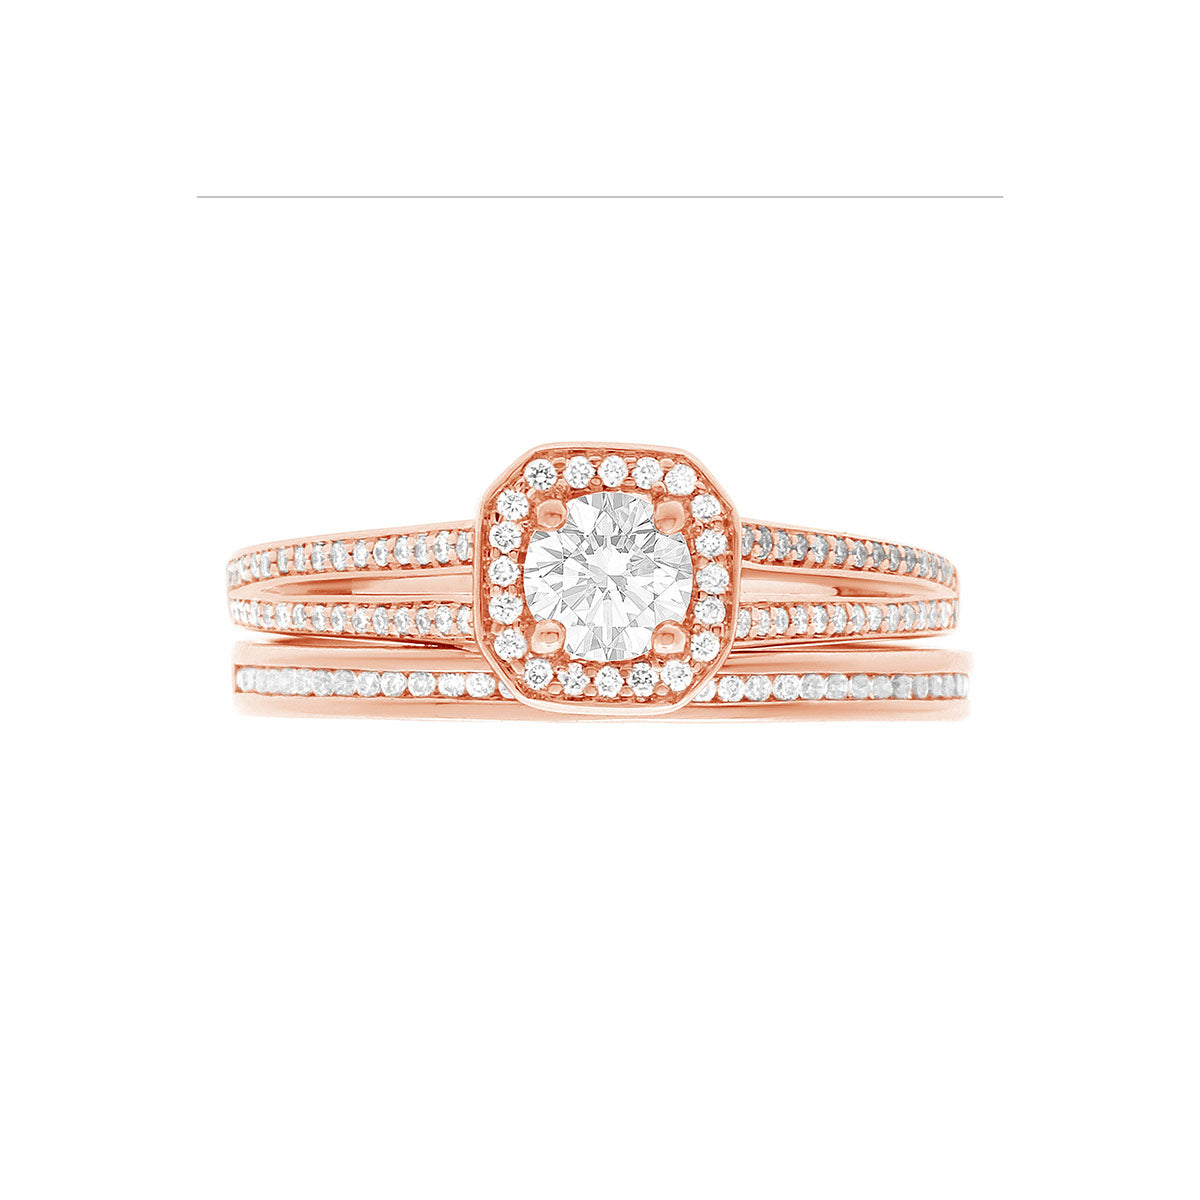 Pavé Halo Diamond Ring with split shoulders in rose gold with a rose gold and diamond wedding ring